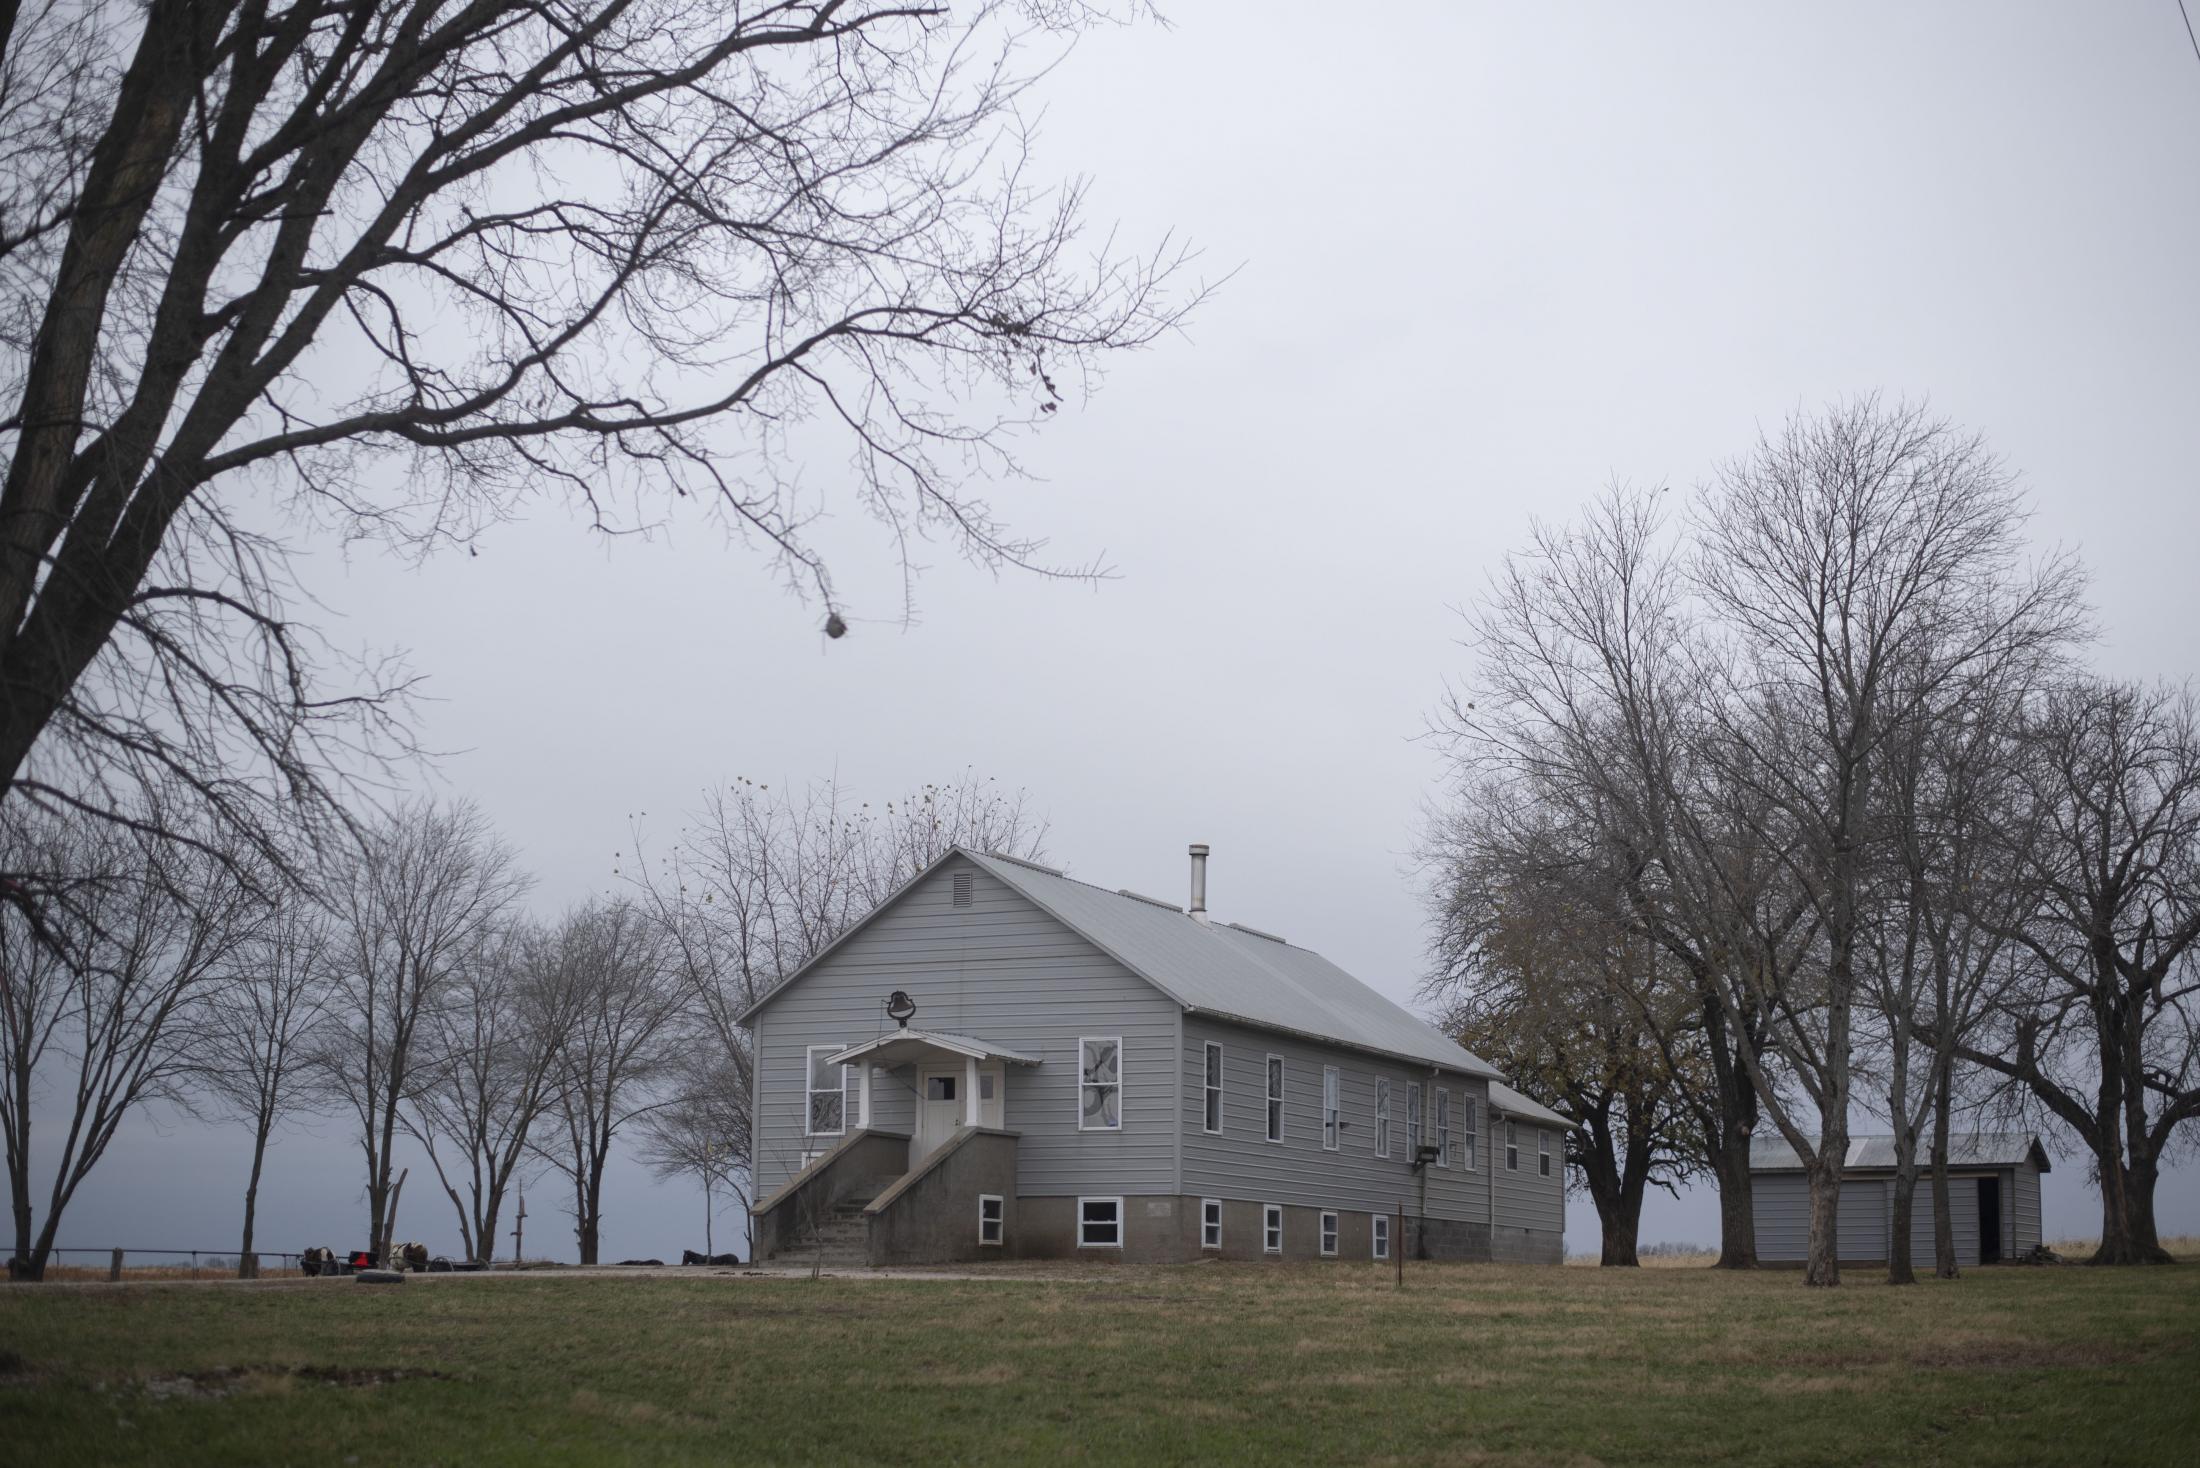 A church belonging to a community of Old Order Mennonites stands Nov. 24. The funeral for my great-great-grandfather, Winfield Reed, was held here in 1970.